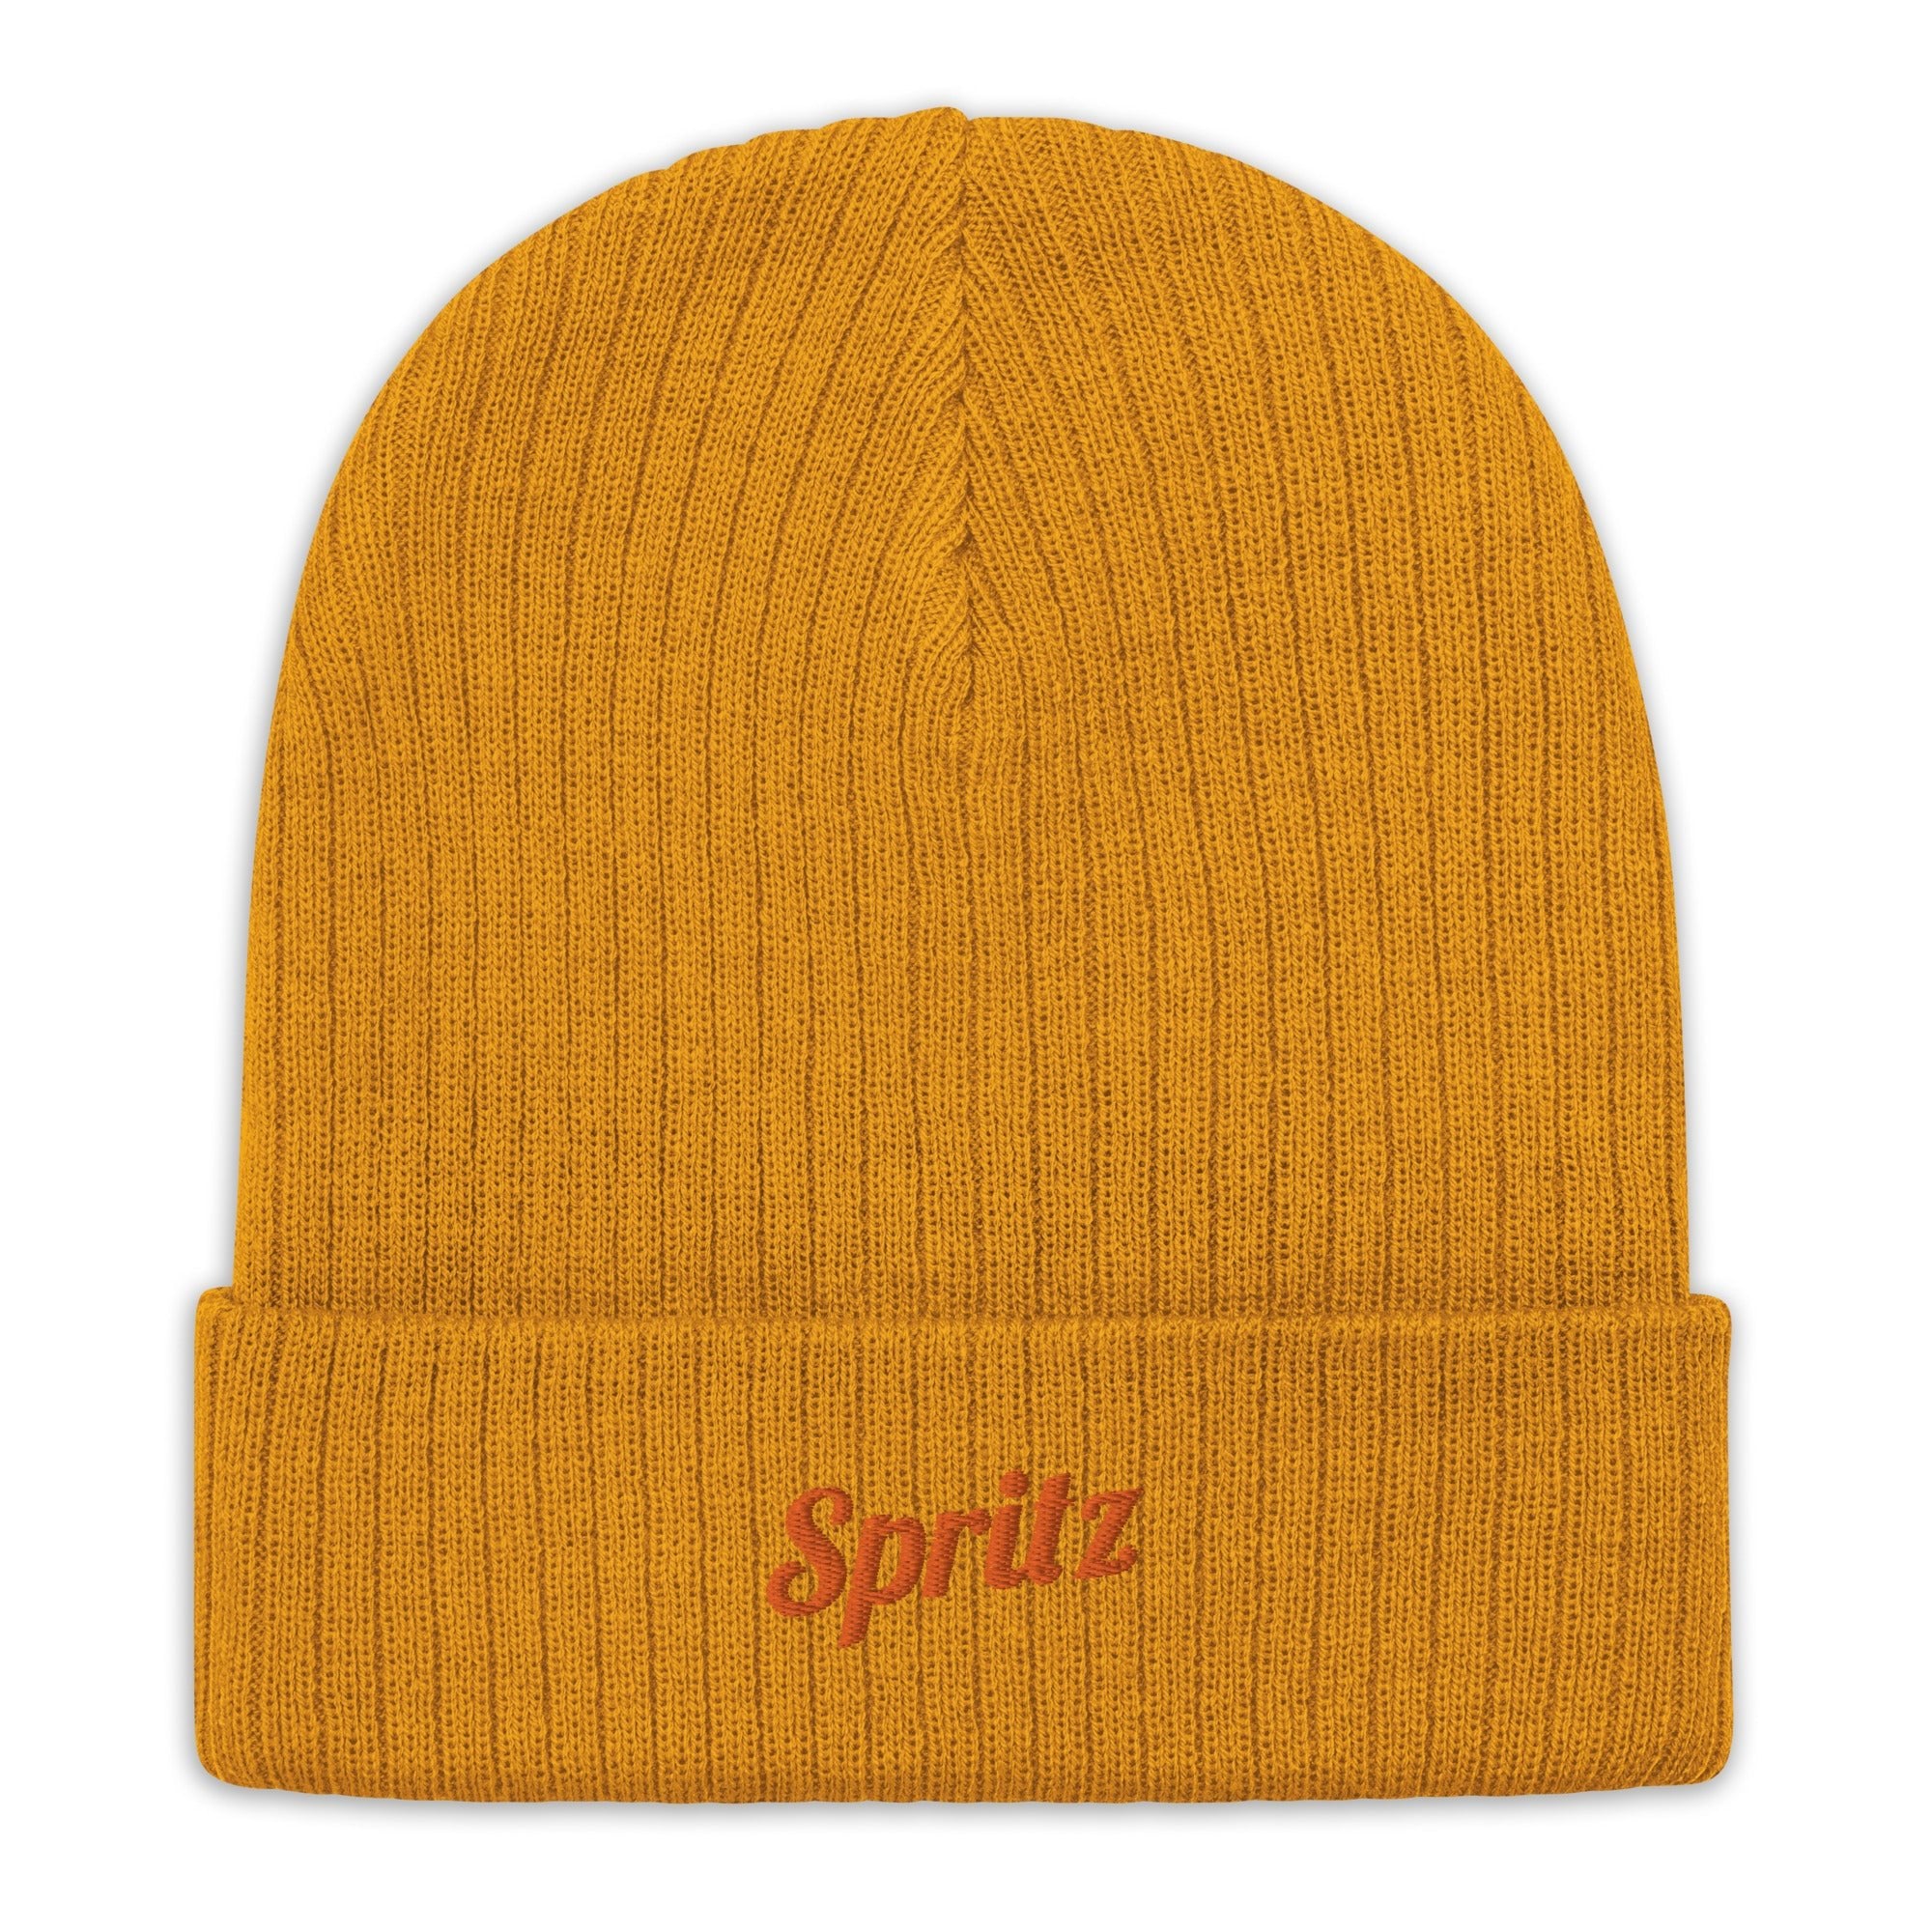 Spritz - Recycled Embroidered Beanie - The Refined Spirit